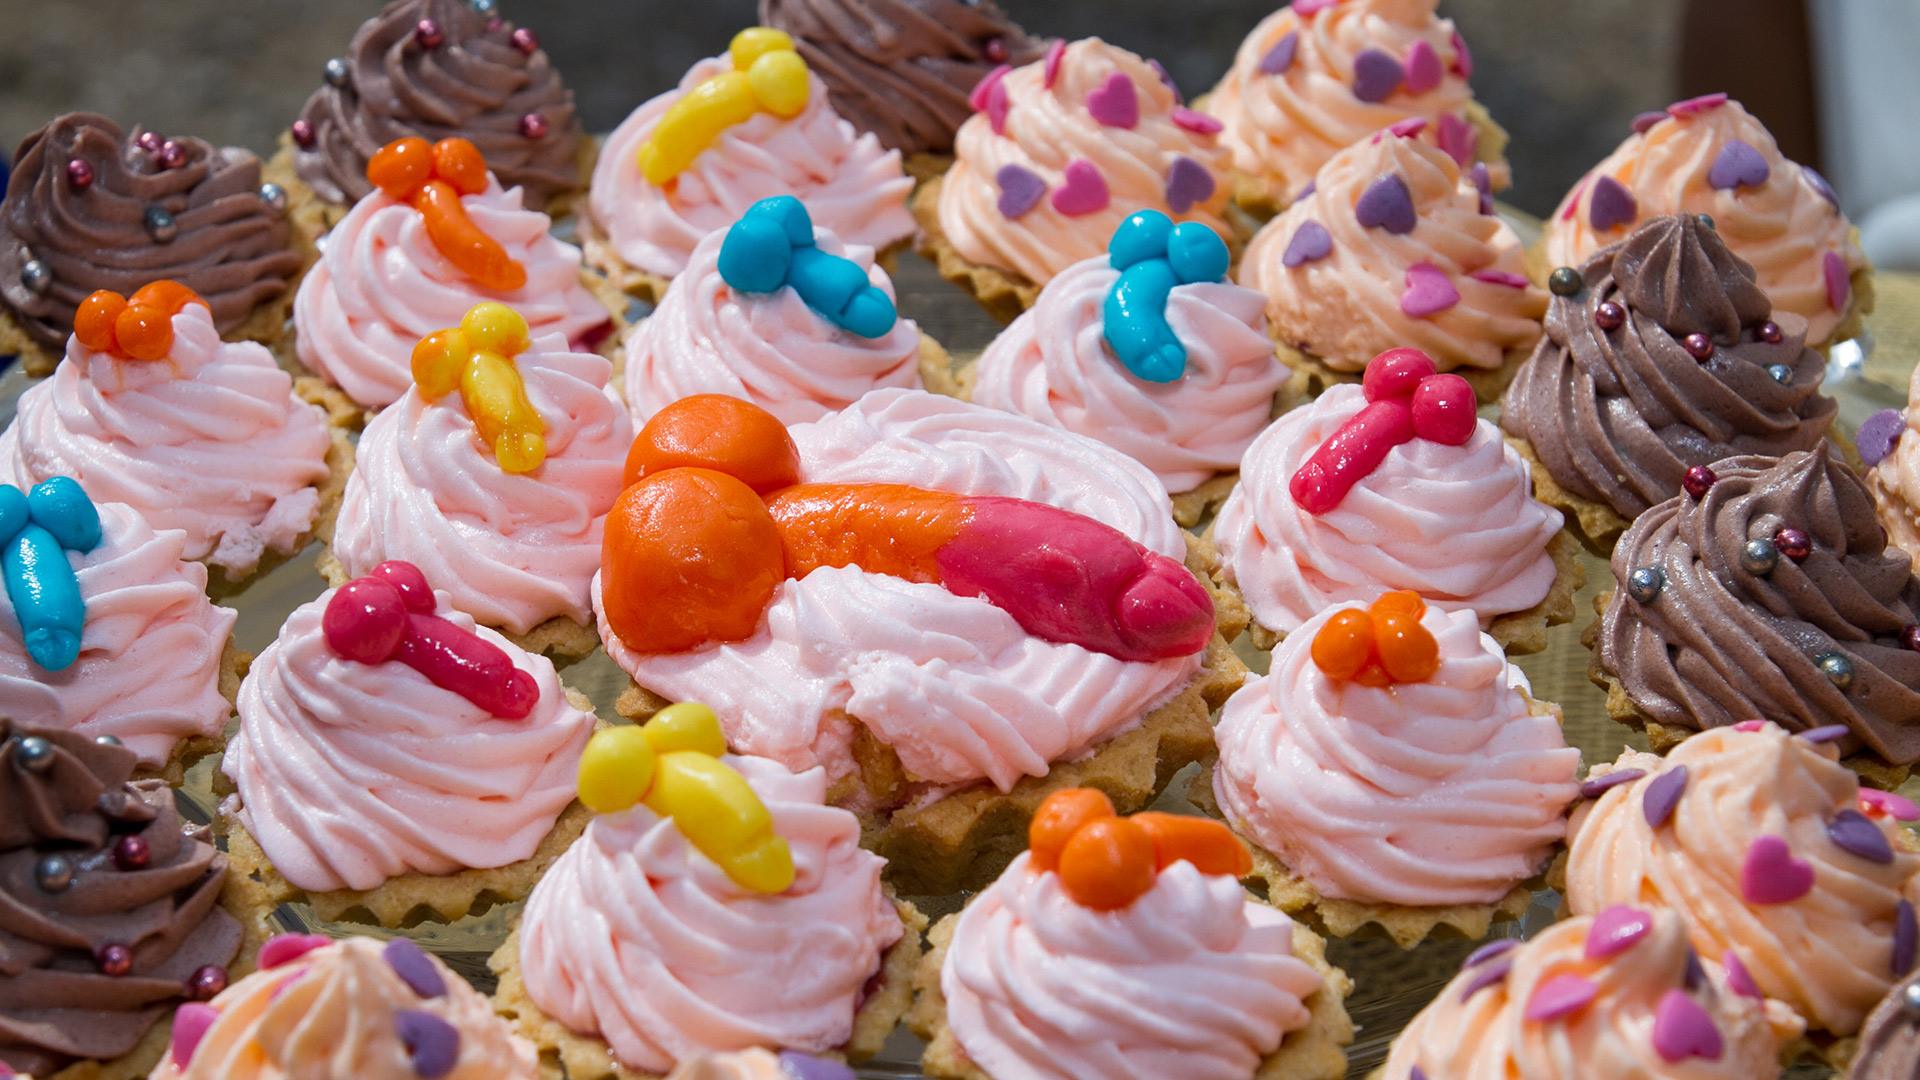 Many cupcakes of different colored toppings in the shapes of penises.